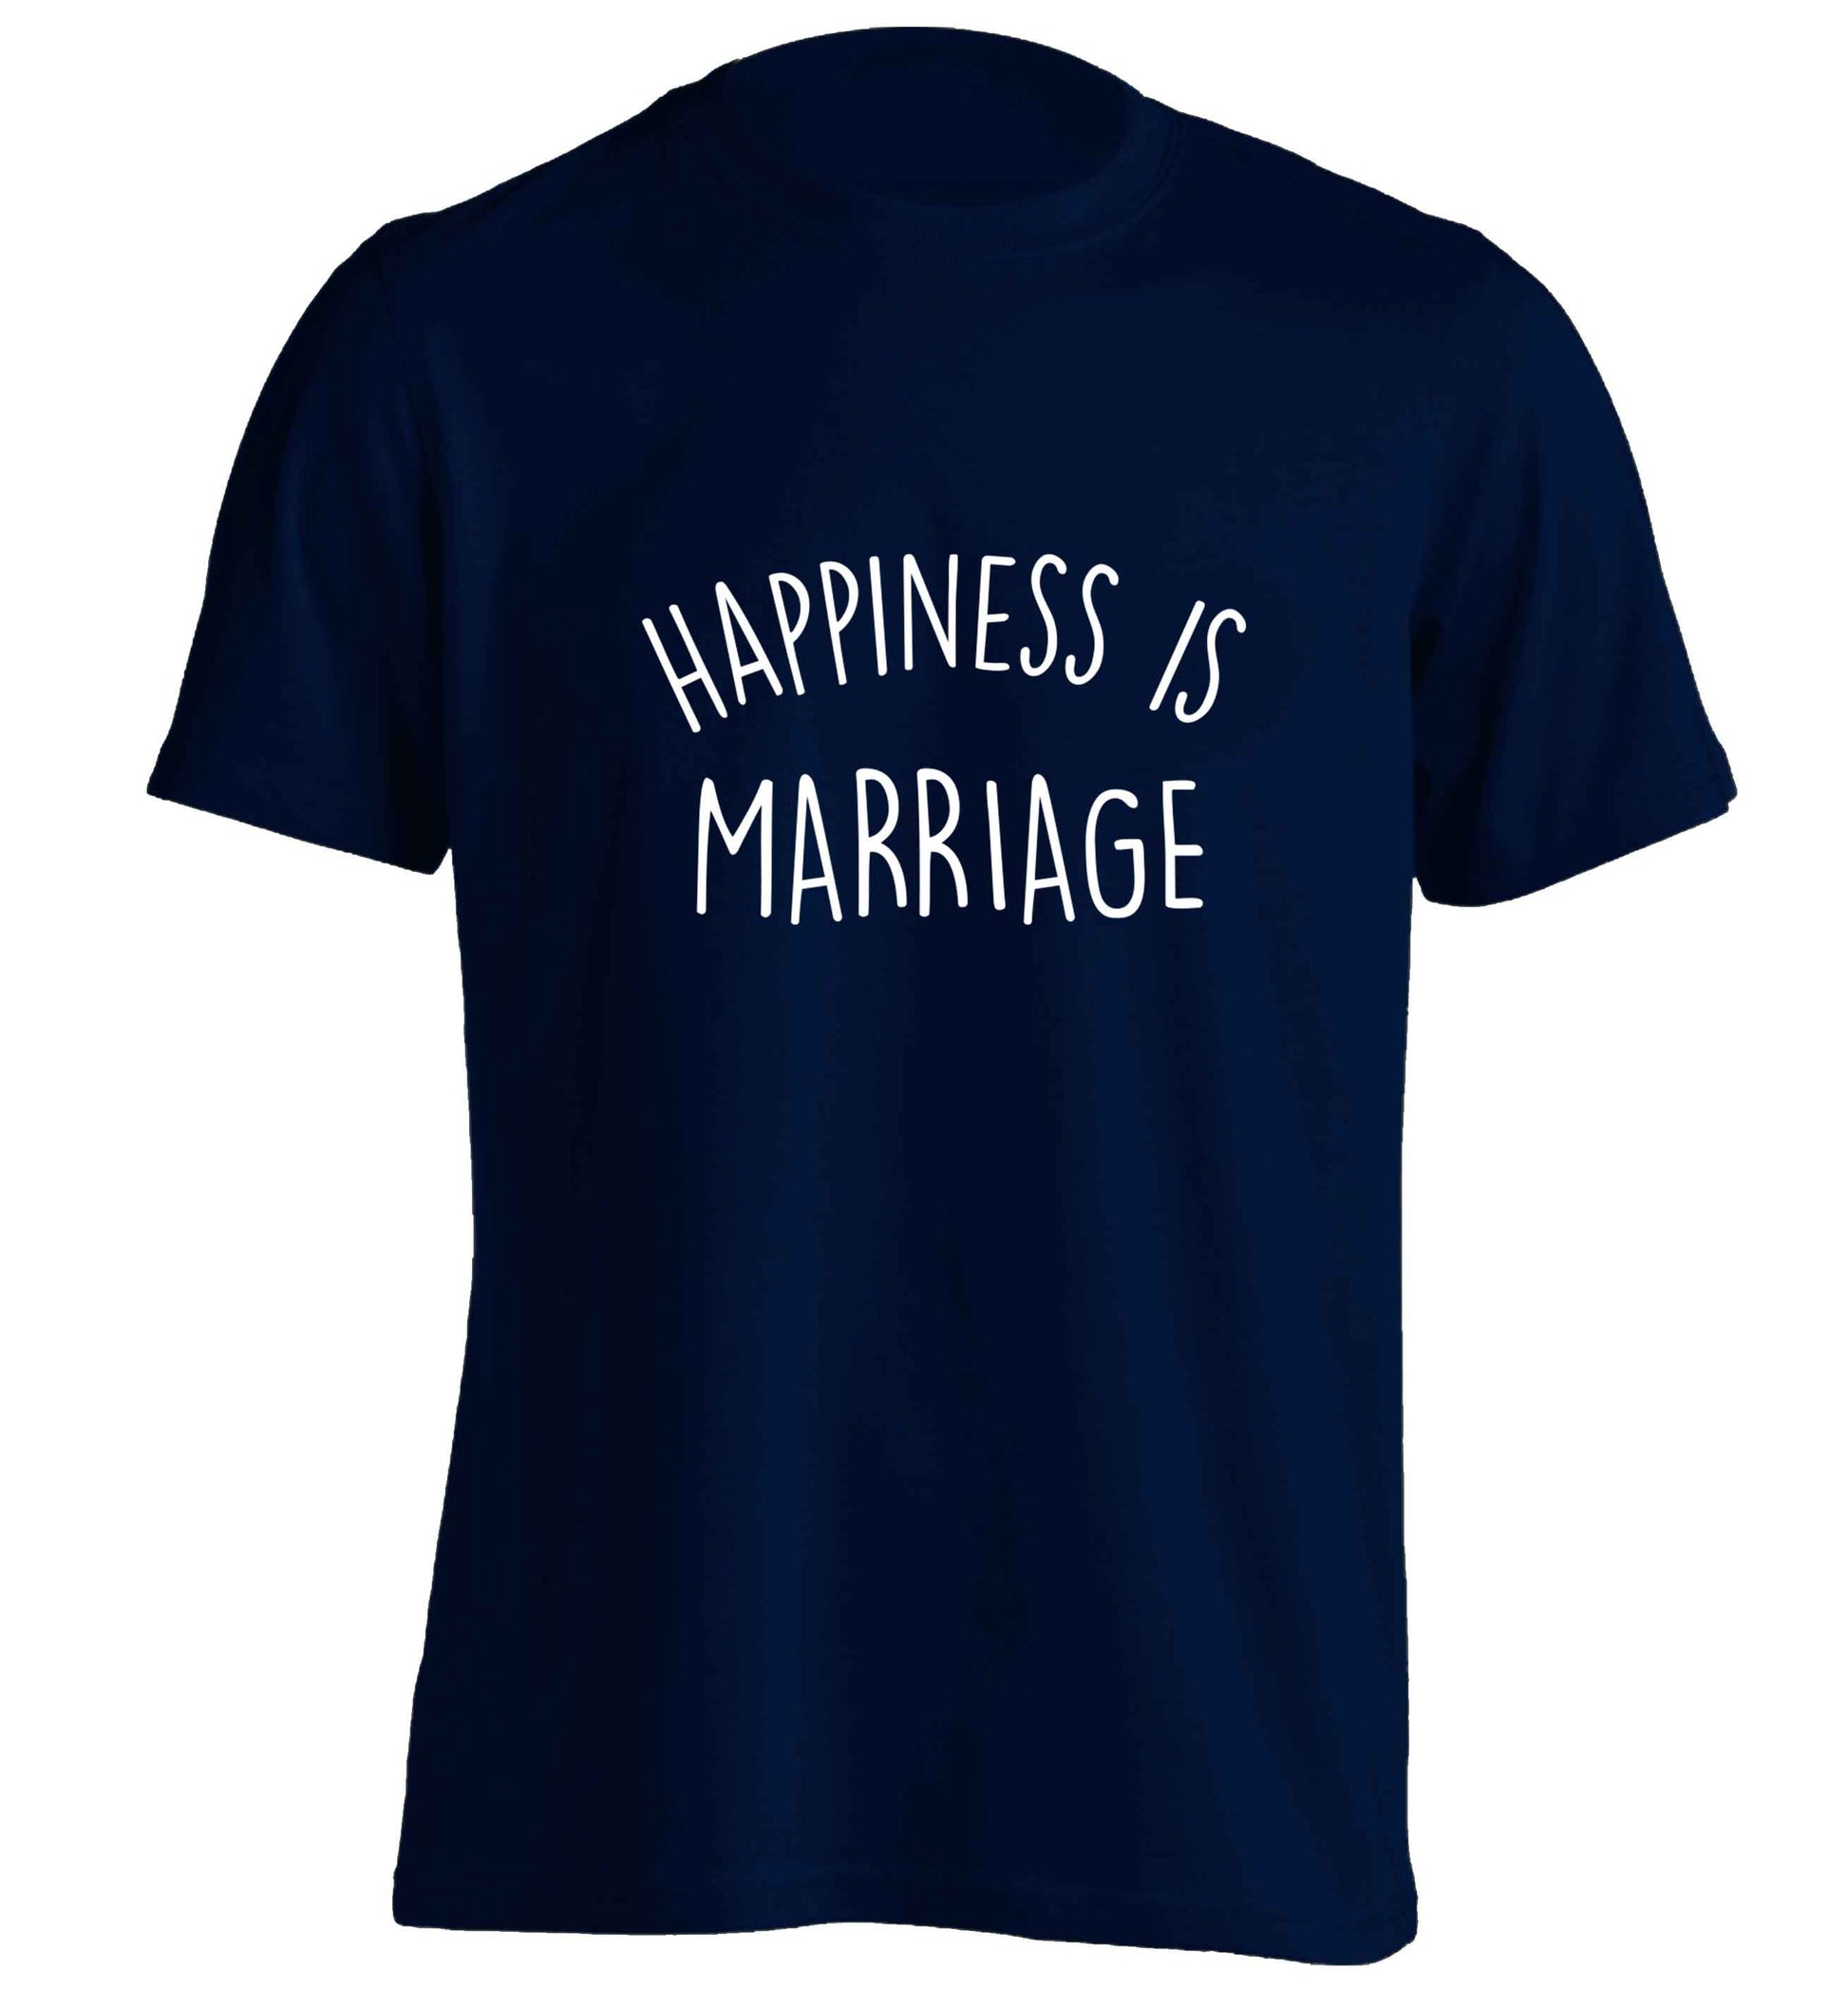 Happiness is marriage adults unisex navy Tshirt 2XL